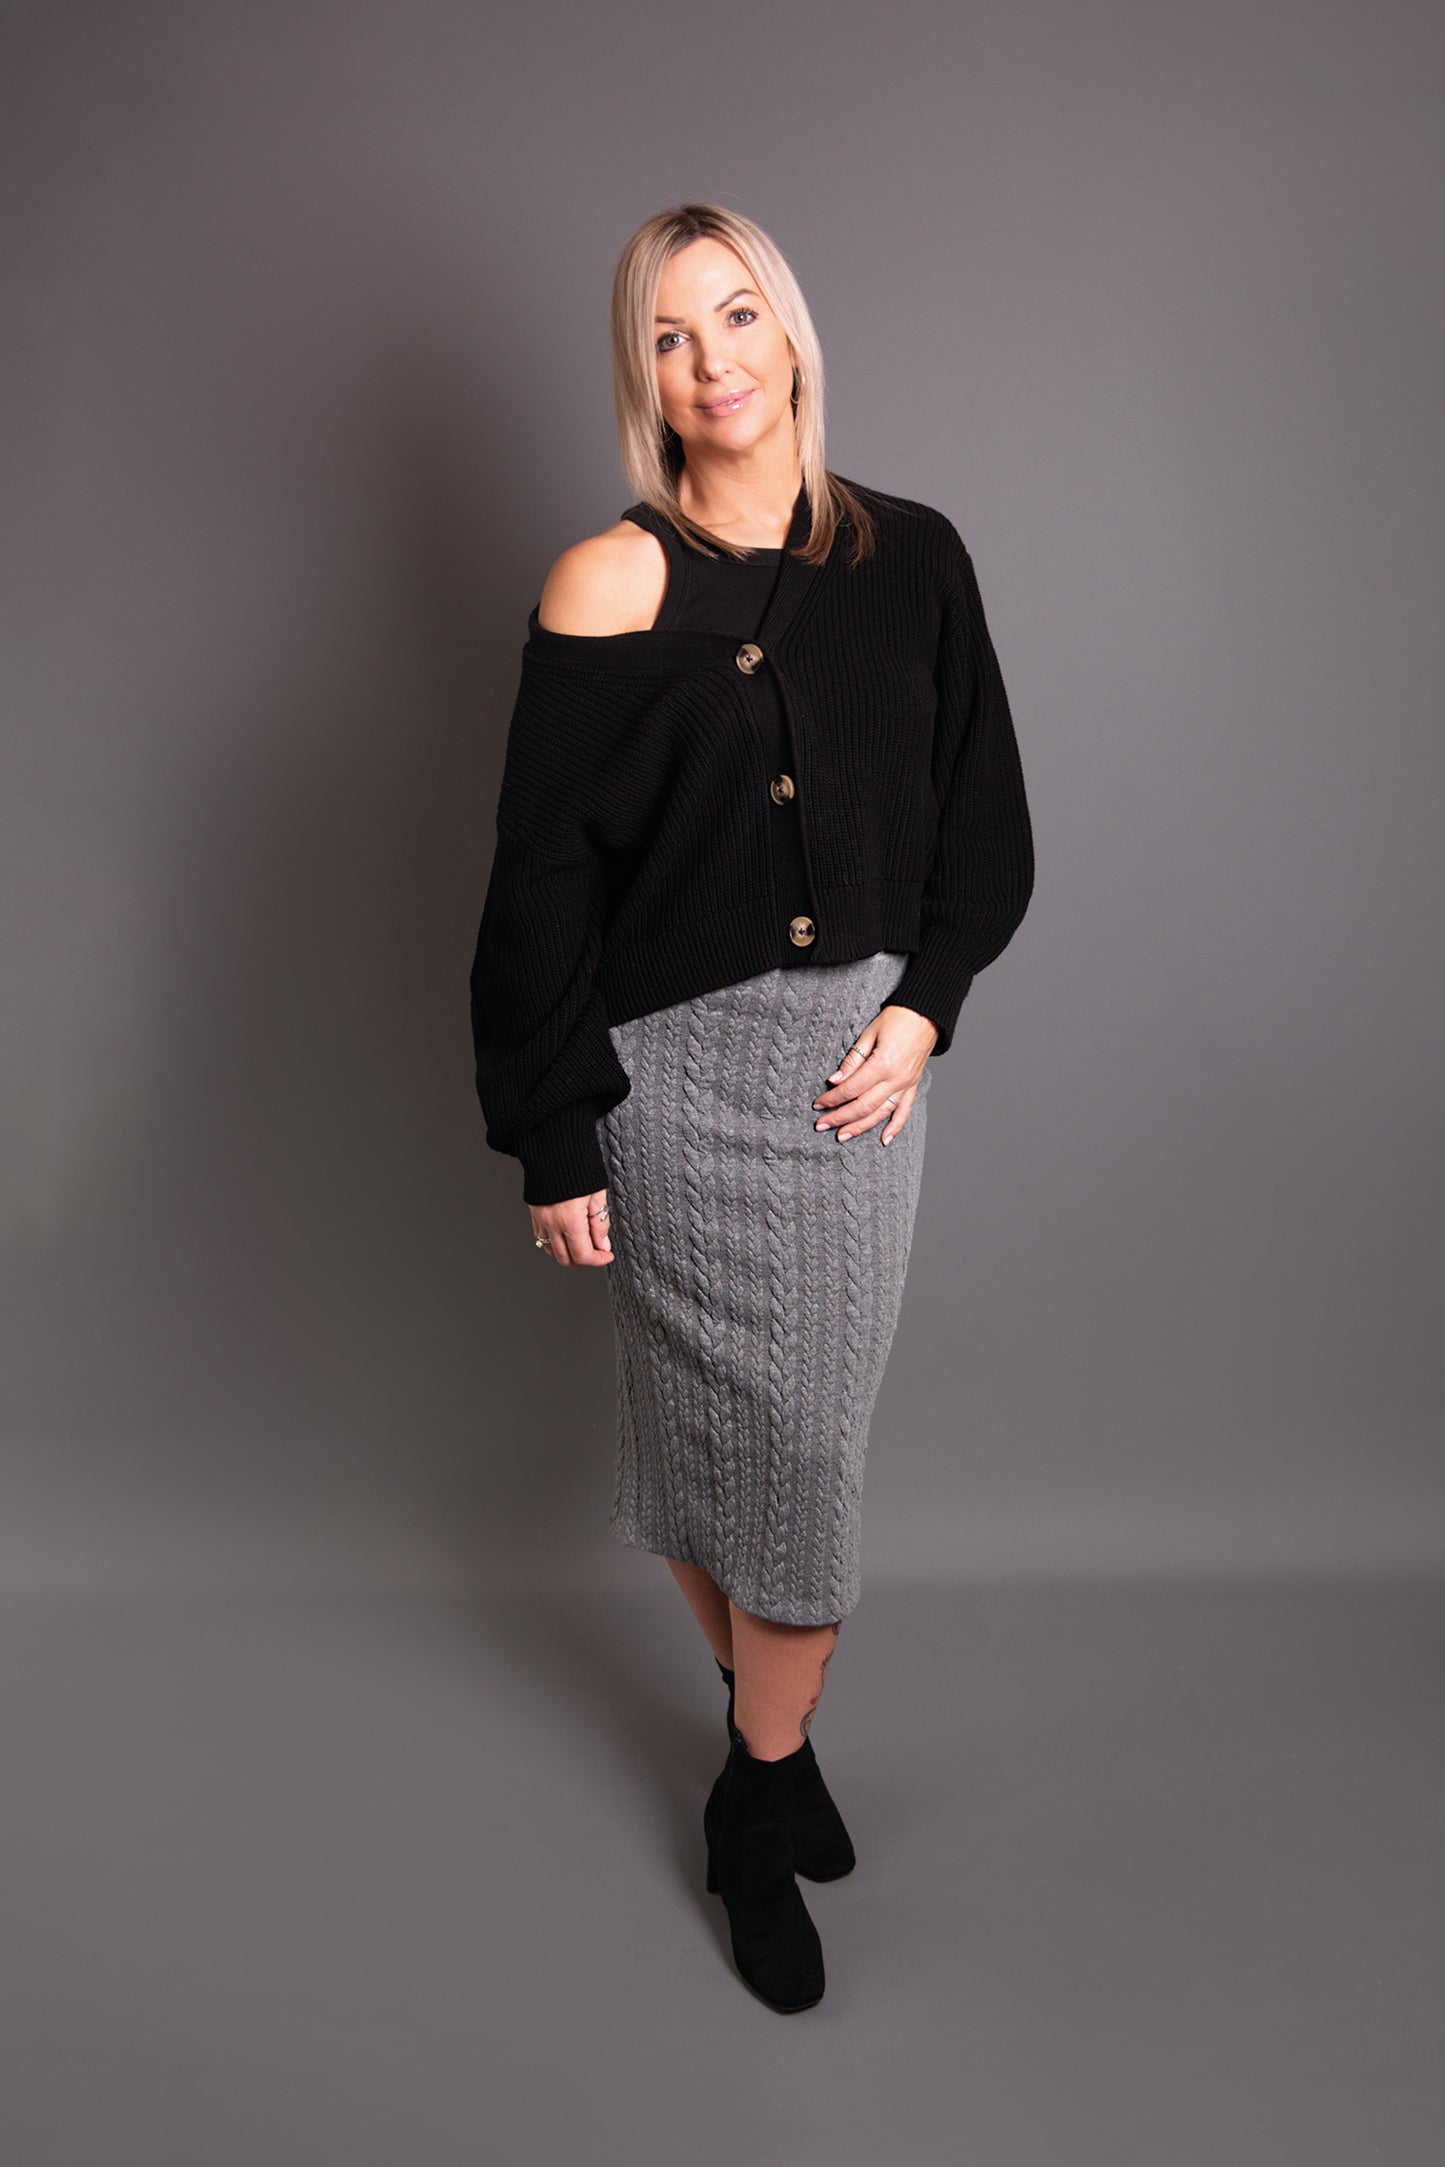 The Shadi Pencil Skirt from Named | Part of Issue 36